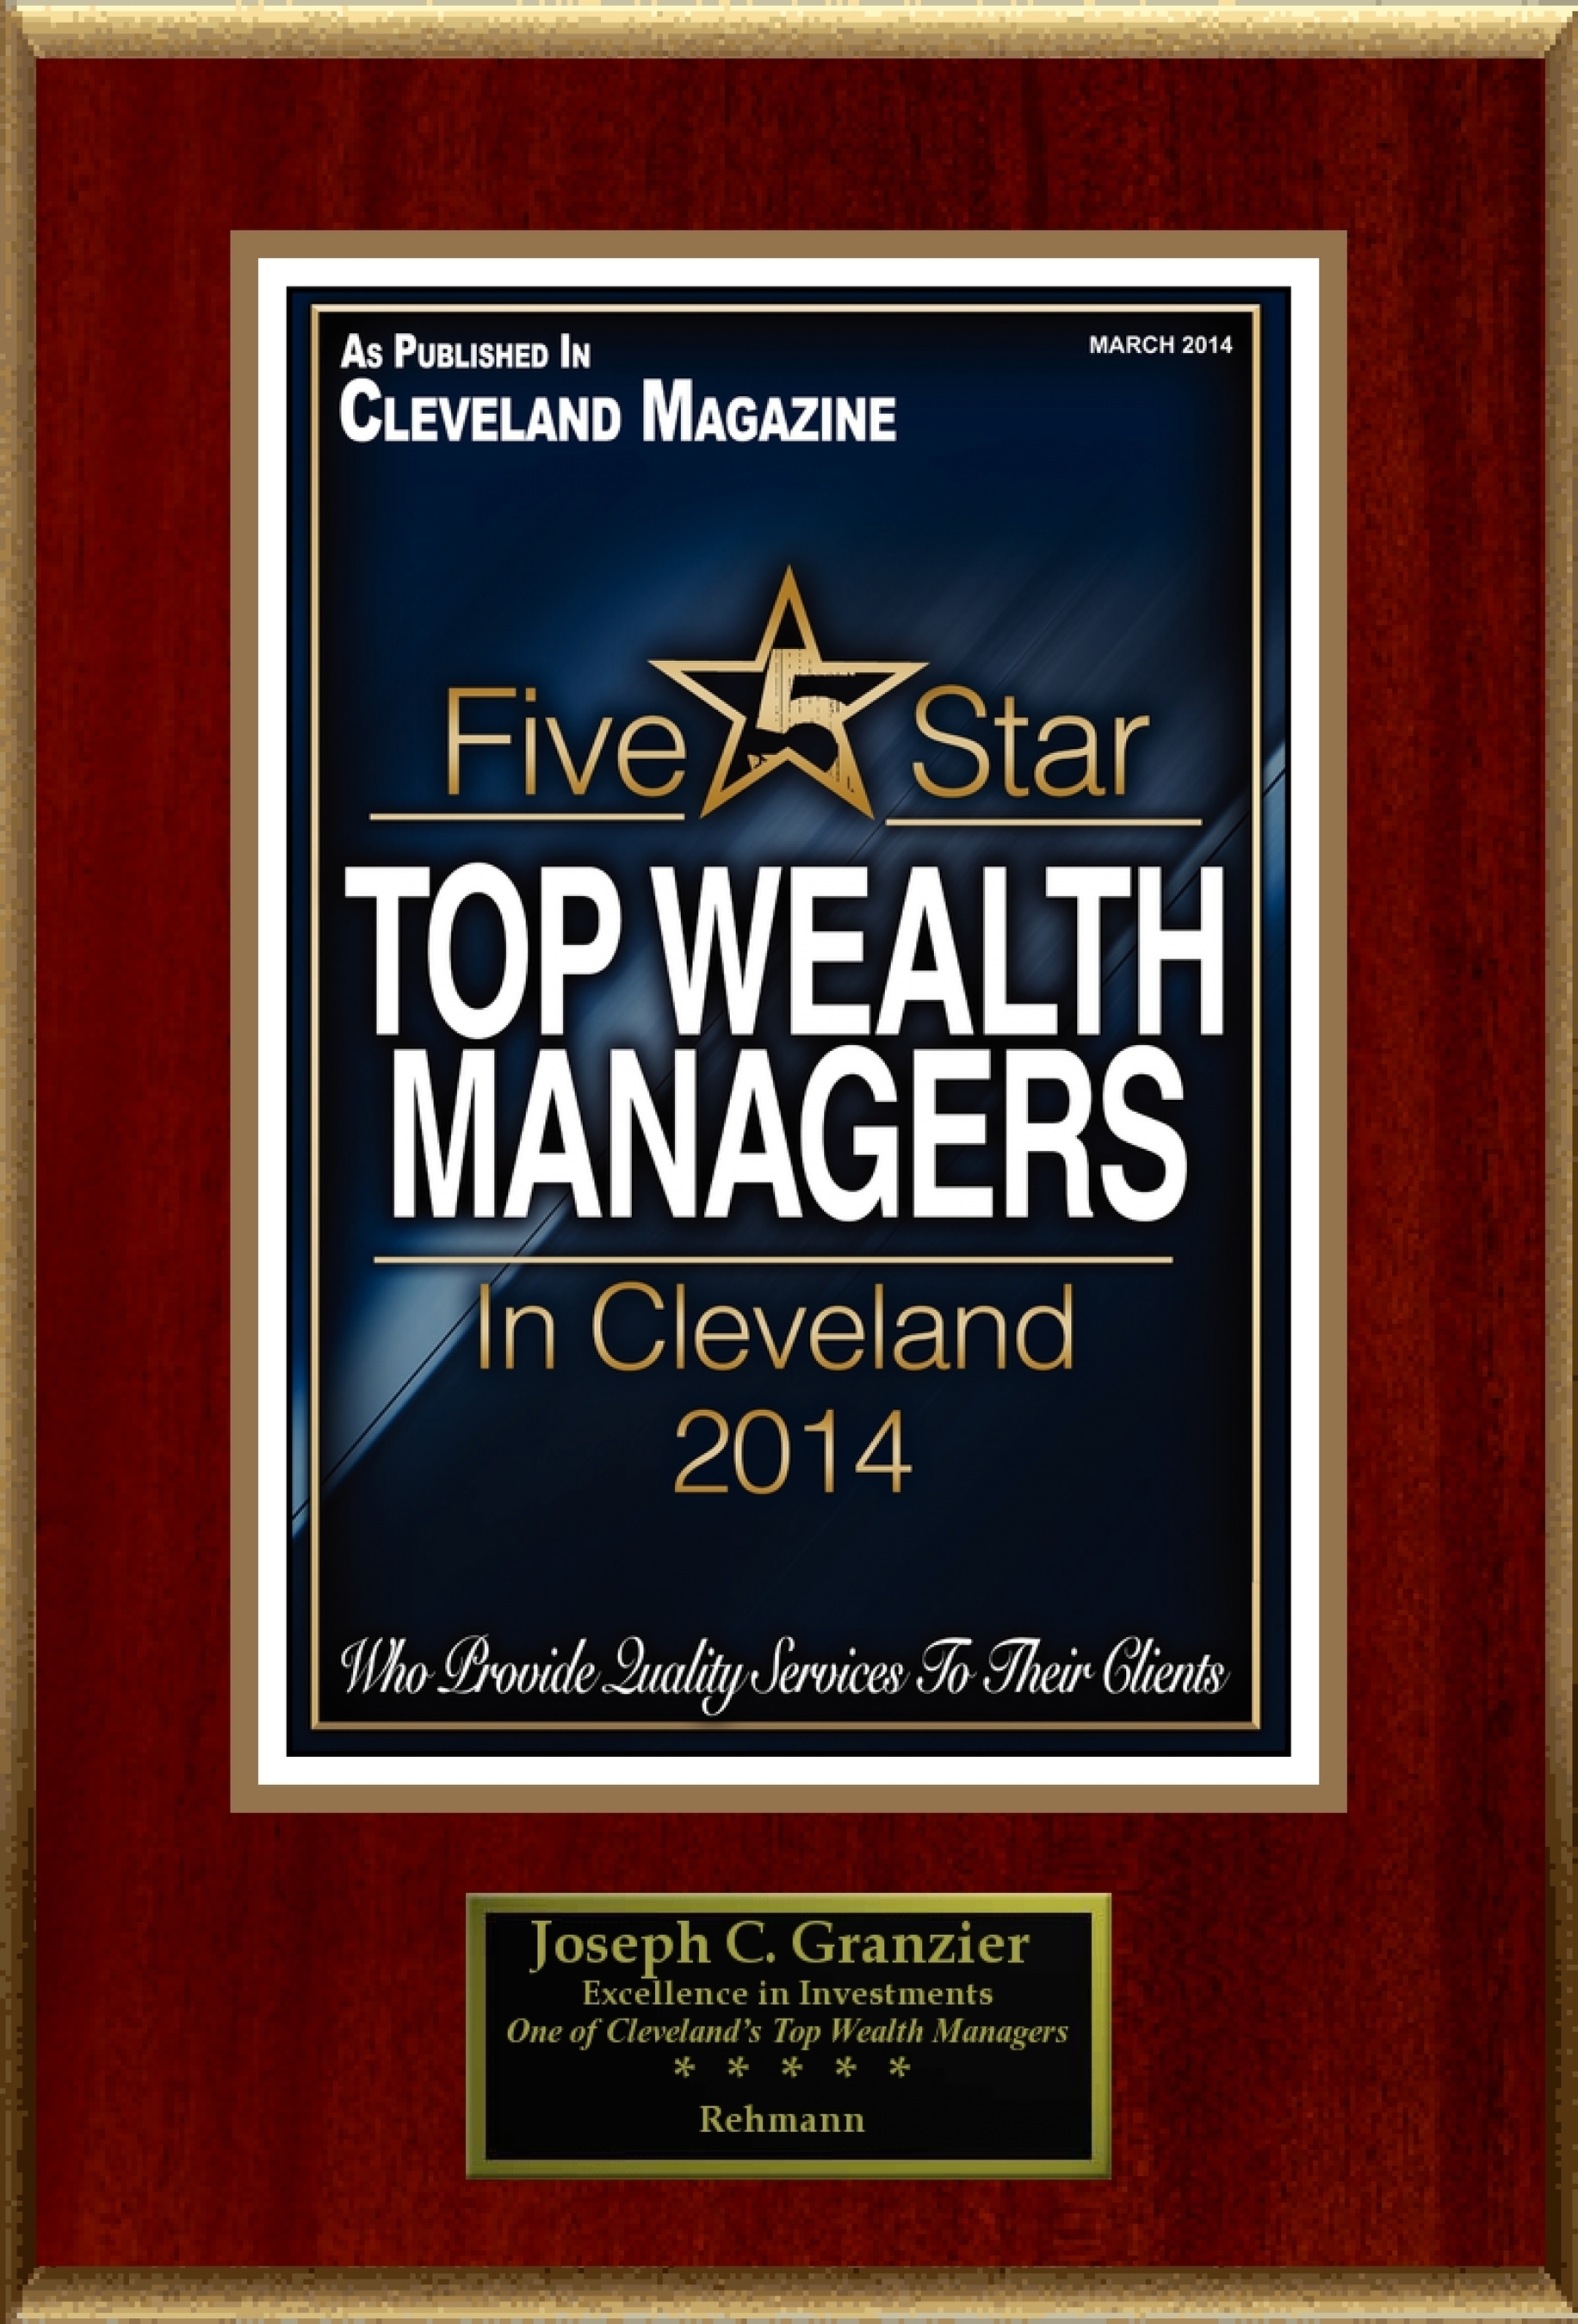 Joseph C. Granzier Selected For "Top Wealth Managers In Cleveland" (PRNewsFoto/American Registry)